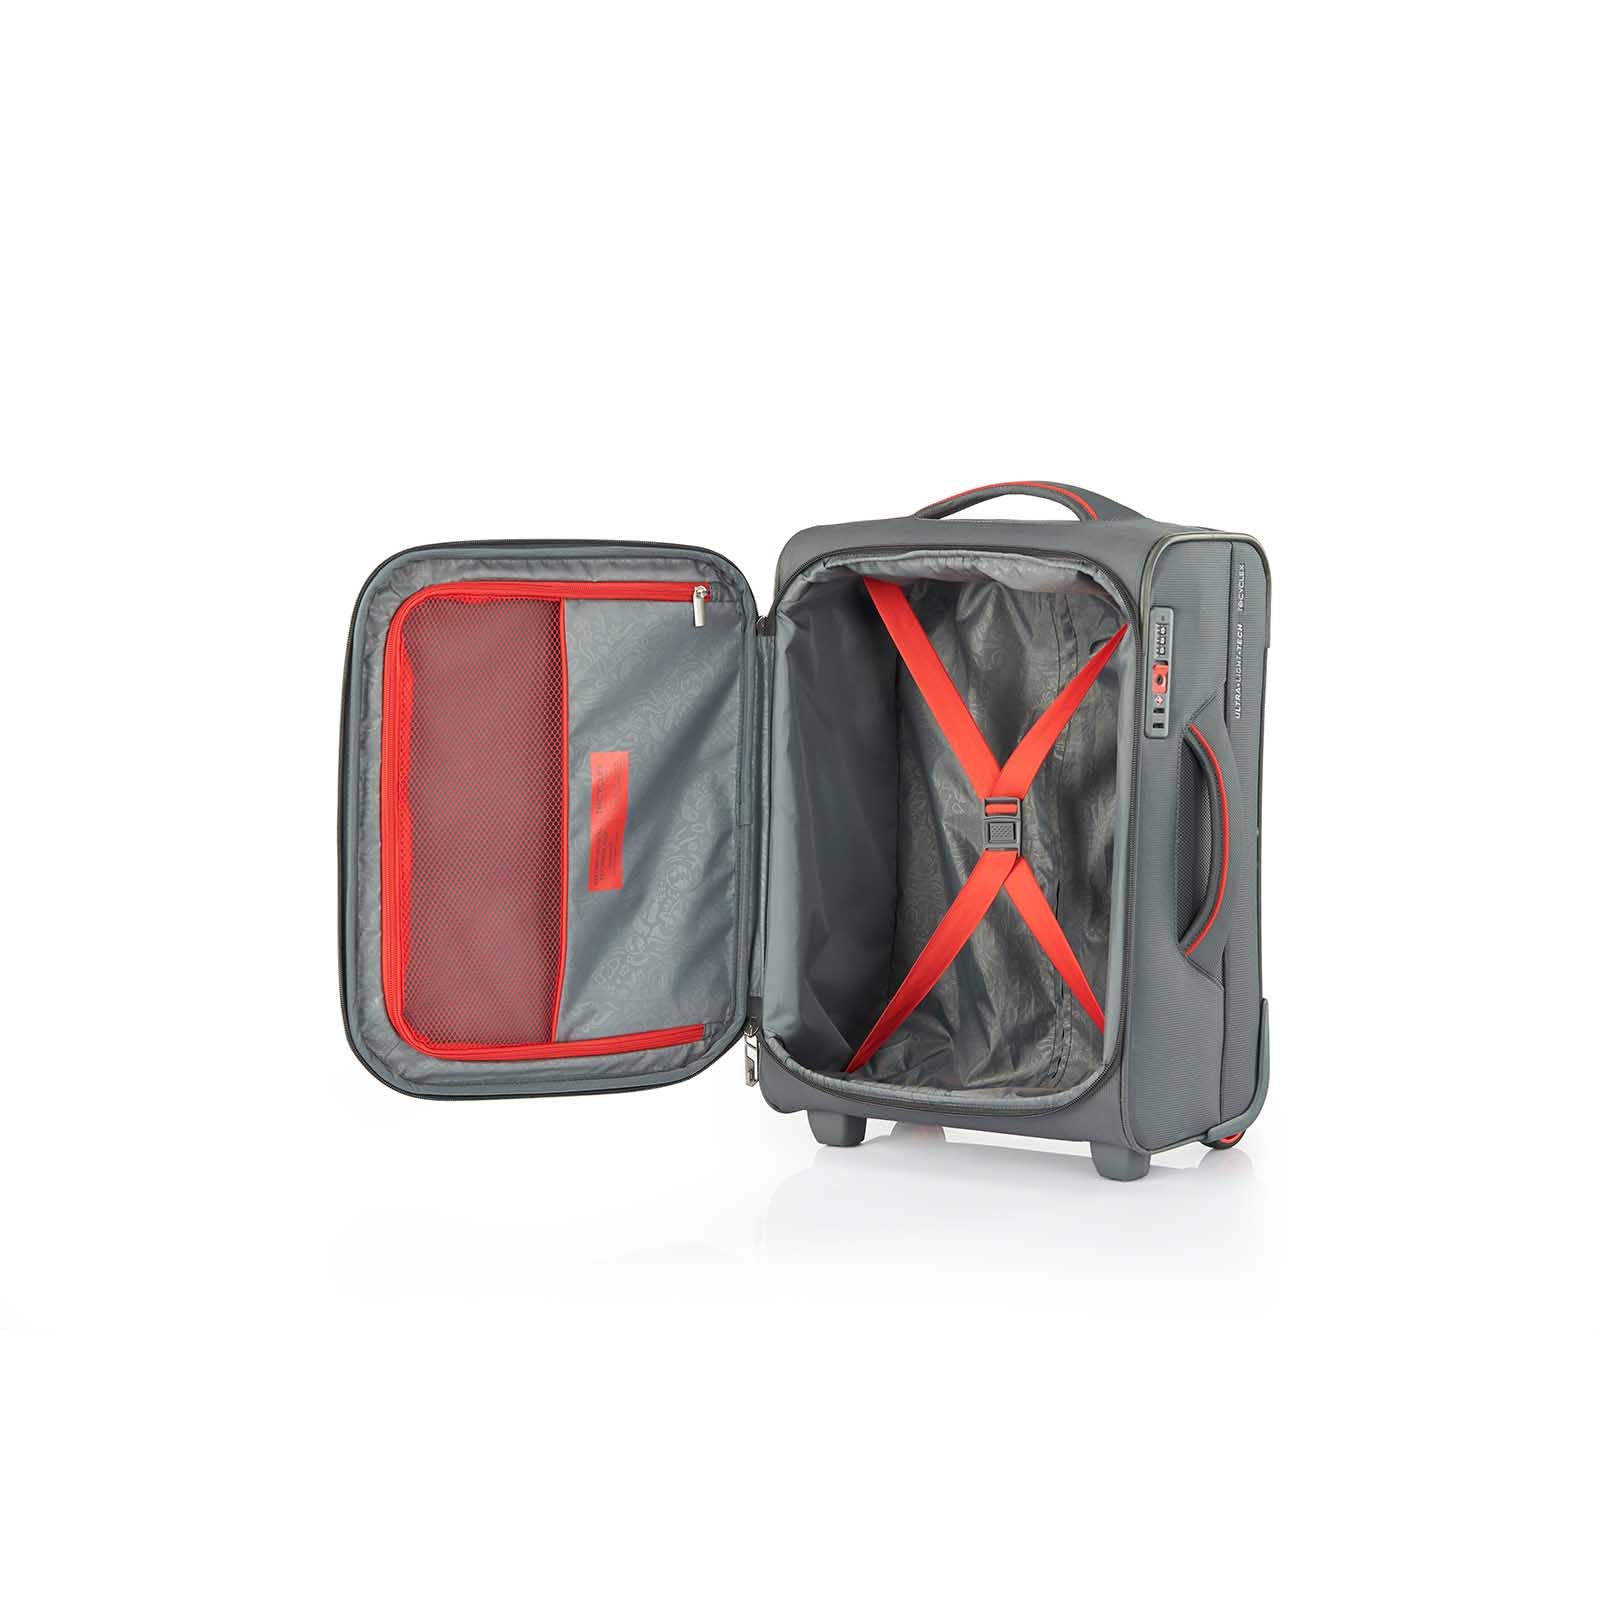 American-Tourister-Applite-4-Eco-50cm-Carry-On-Suitcase-Grey-Red-Open